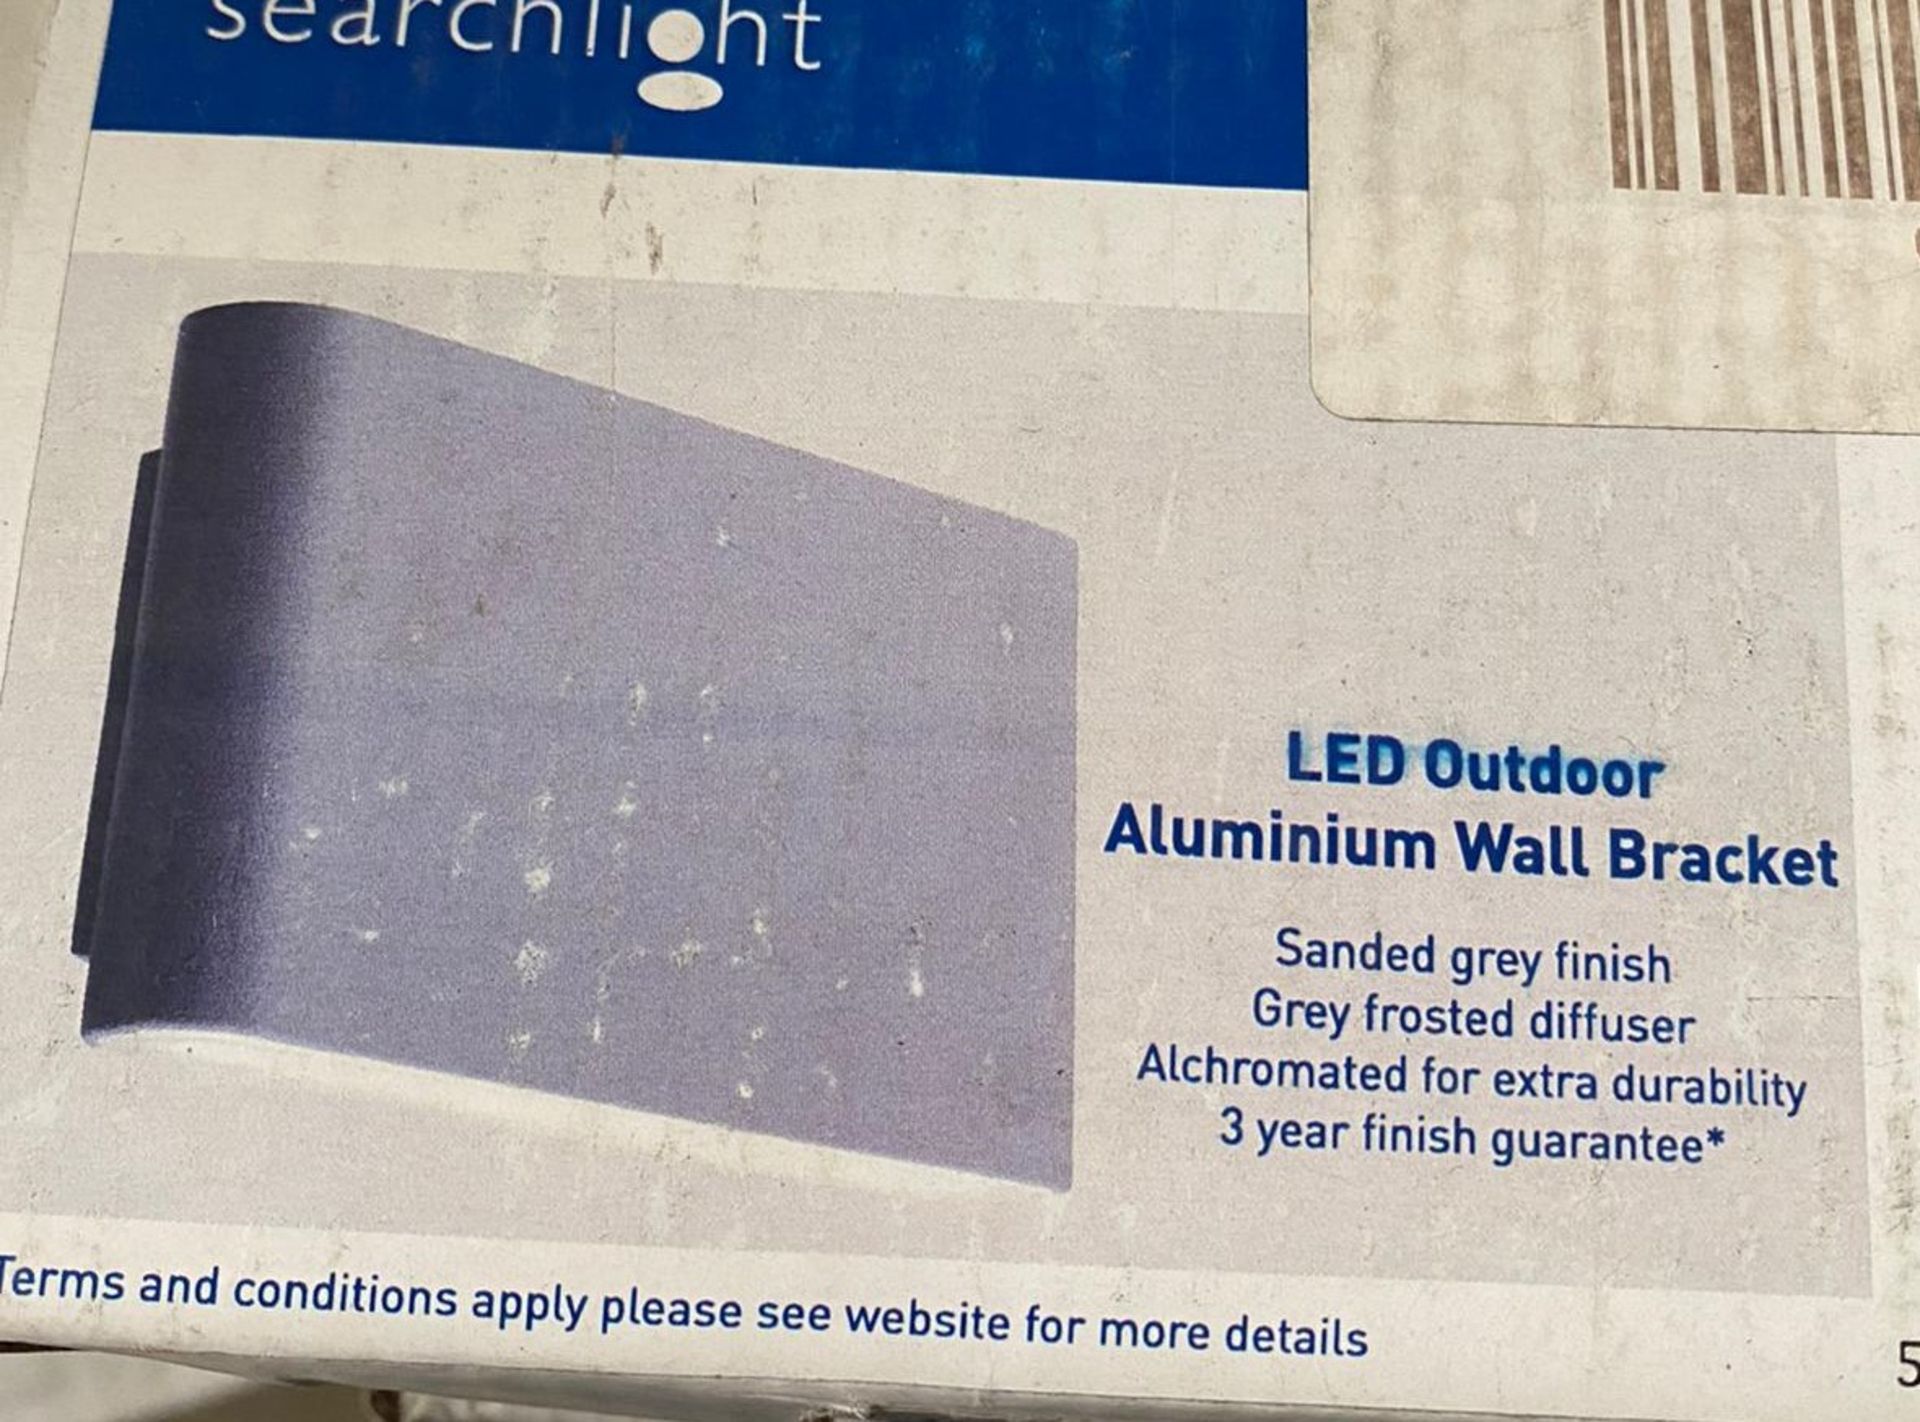 1 x Searchlight LED Outdoor Aluminium Wall Bracket - Ref: 2562GY - New and Boxed - RRP: £70